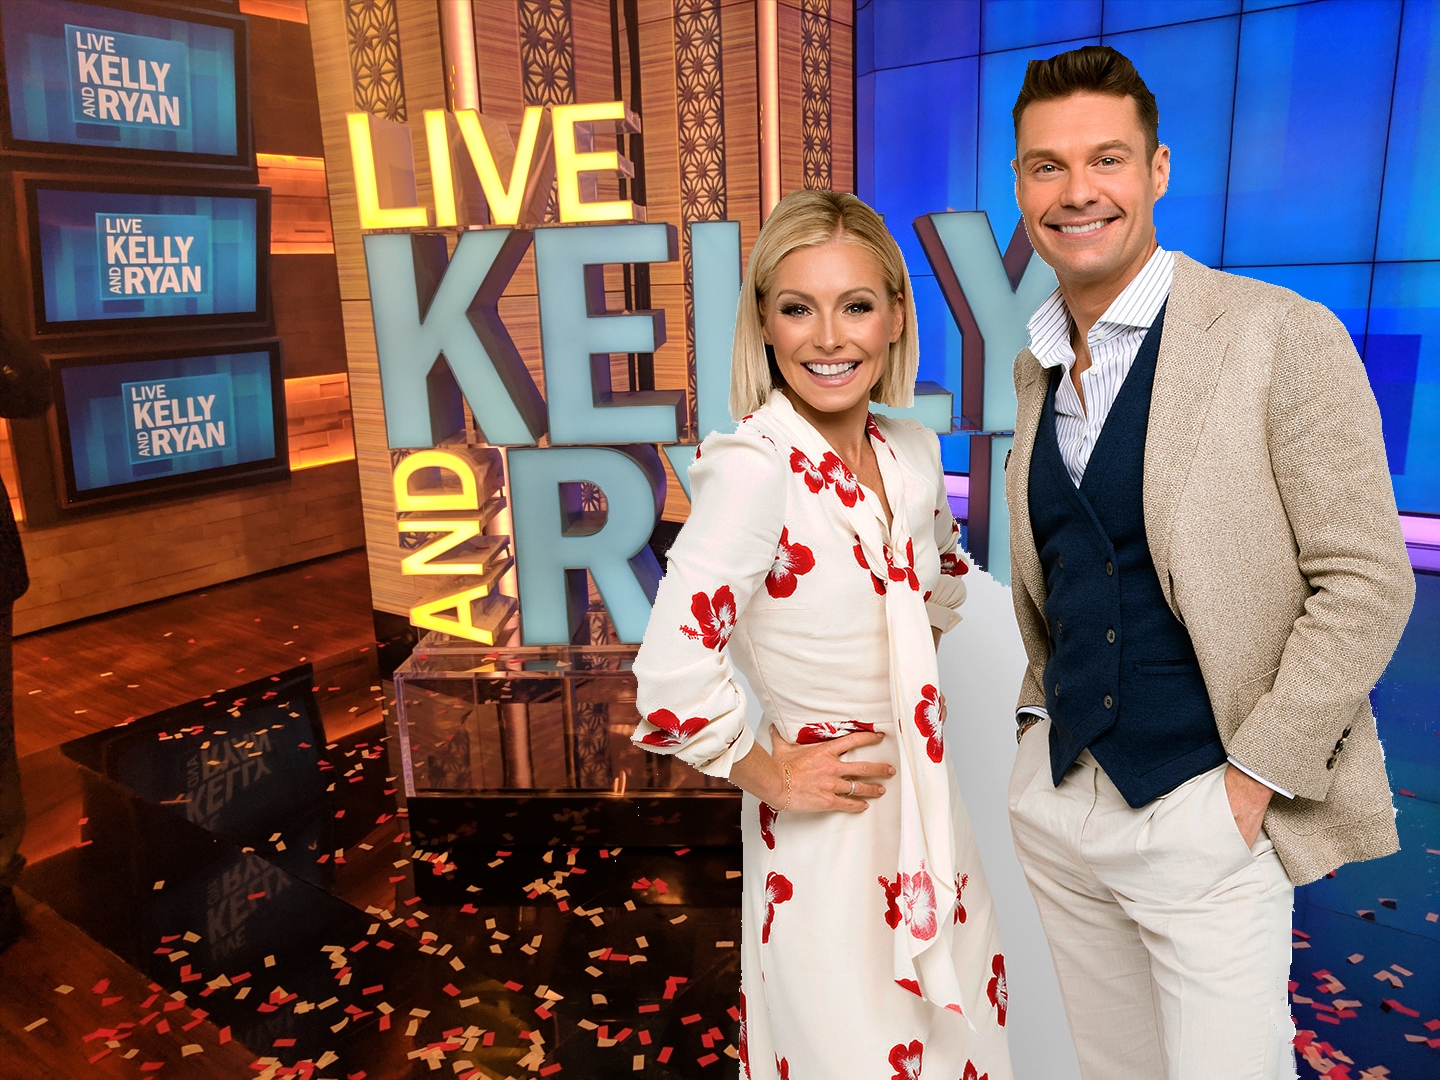 Live with Kelly & Ryan Free TV Show Tickets